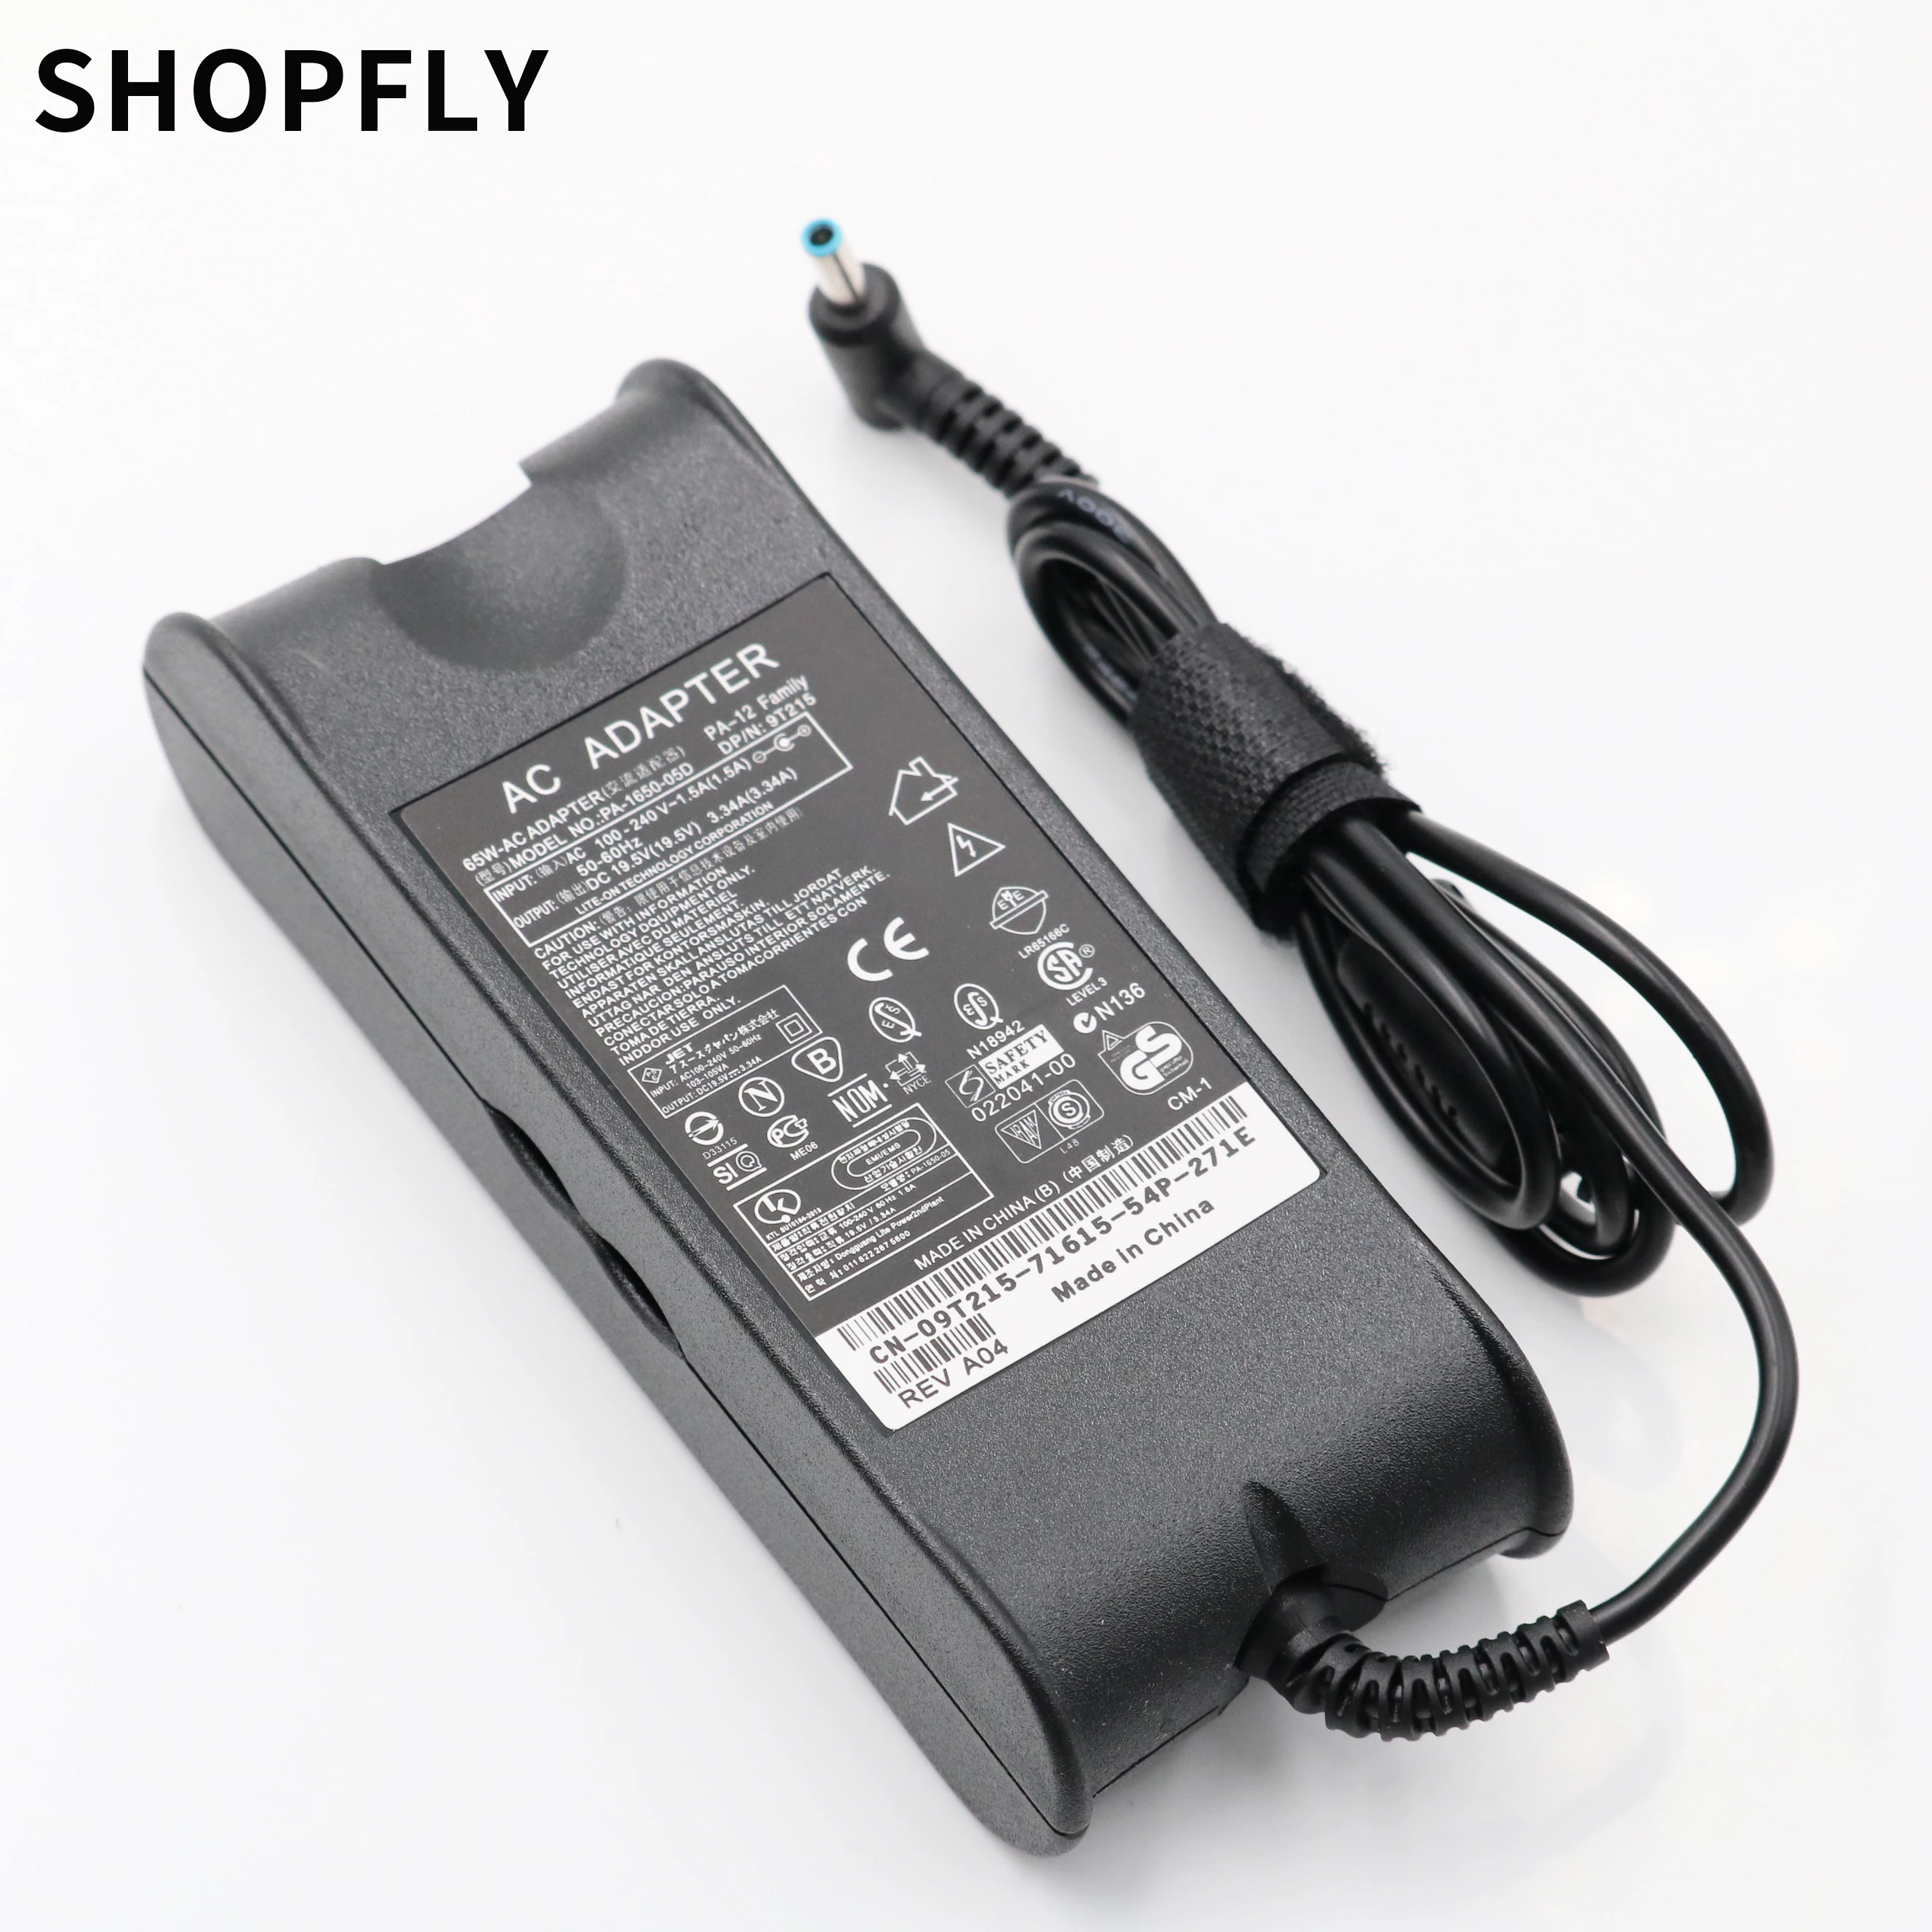 

19.5V 3.34A 65W laptop AC power adapter charger for Dell Inspiron 15 3551 3552 3558 5551 5552 5555 5558 5559 7568 P28E P57G